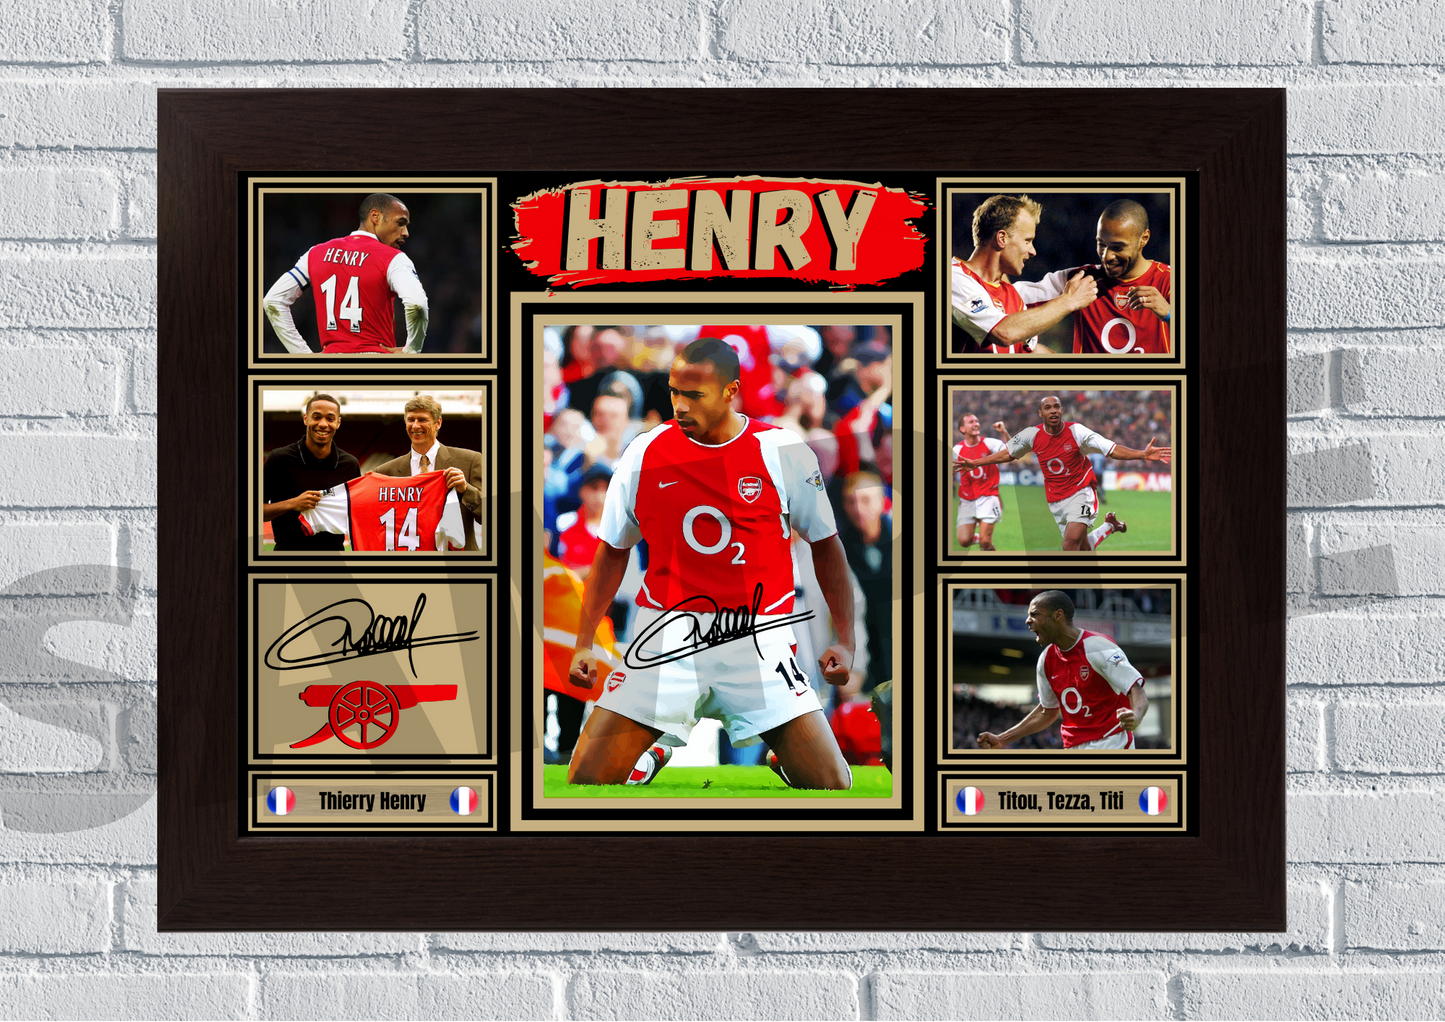 Thierry Henry (Arsenal) #72 - Football print/poster collectable/gift/memorabilia